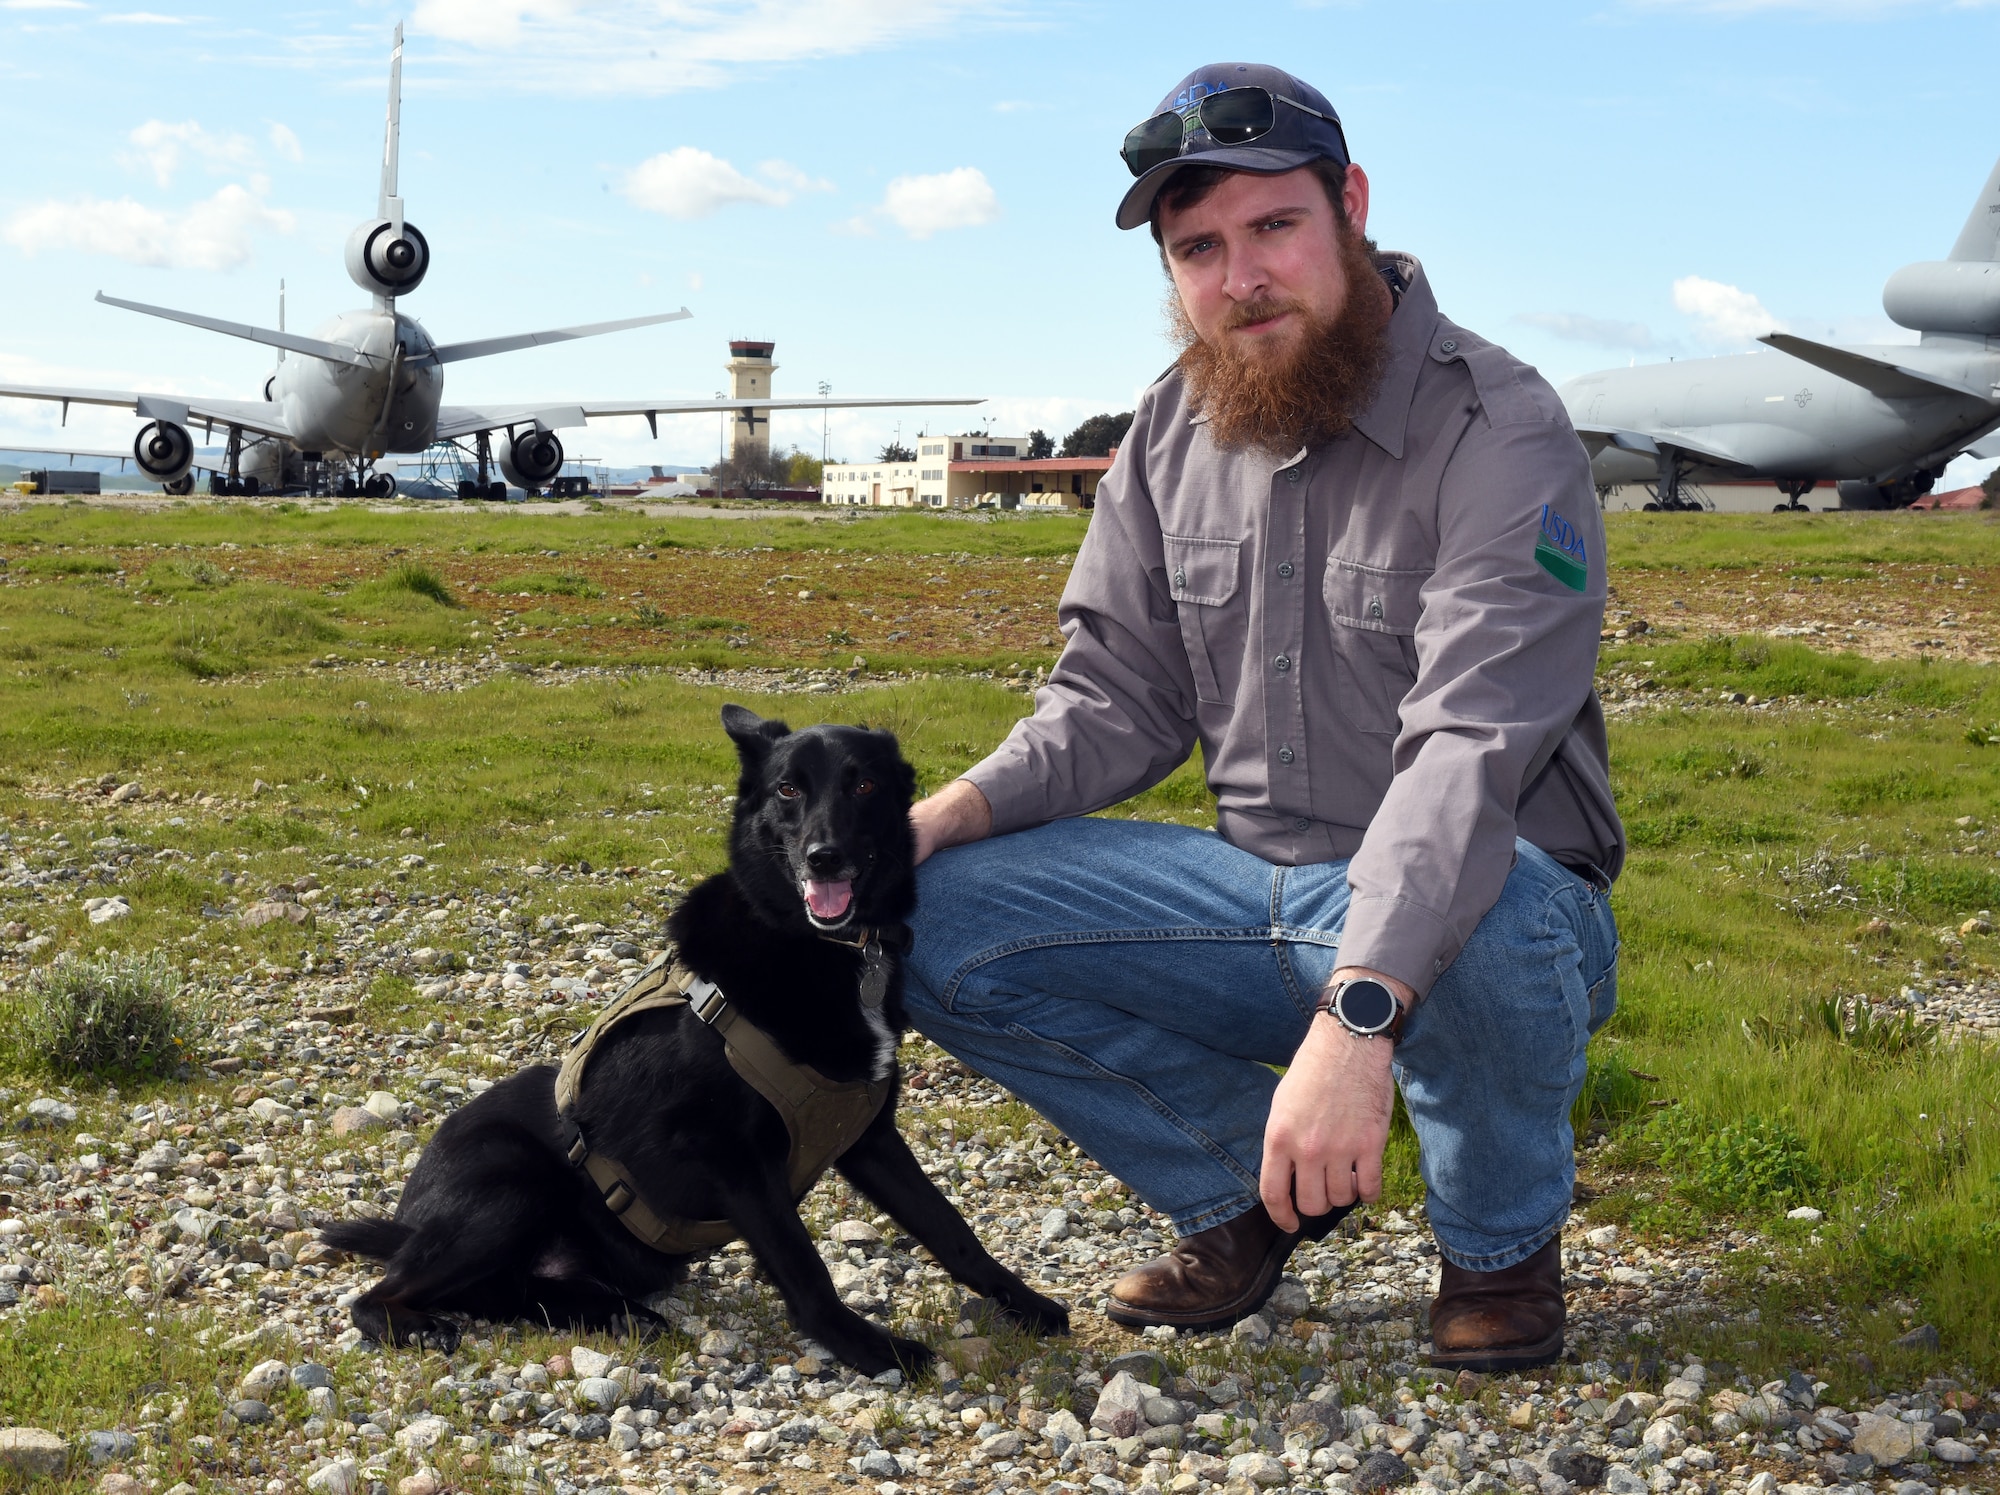 Otto, the safety dog, and his handler, Matt Stevens, U.S. Department of Agriculture airport biologist, pose for a photo Feb. 20, 2019, at Travis Air Force Base, Calif. Matt rescued and trained Otto so they could work together to prevent bird and aircraft strikes. (U.S. Air Force photo by Airman 1st Class Christian Conrad)